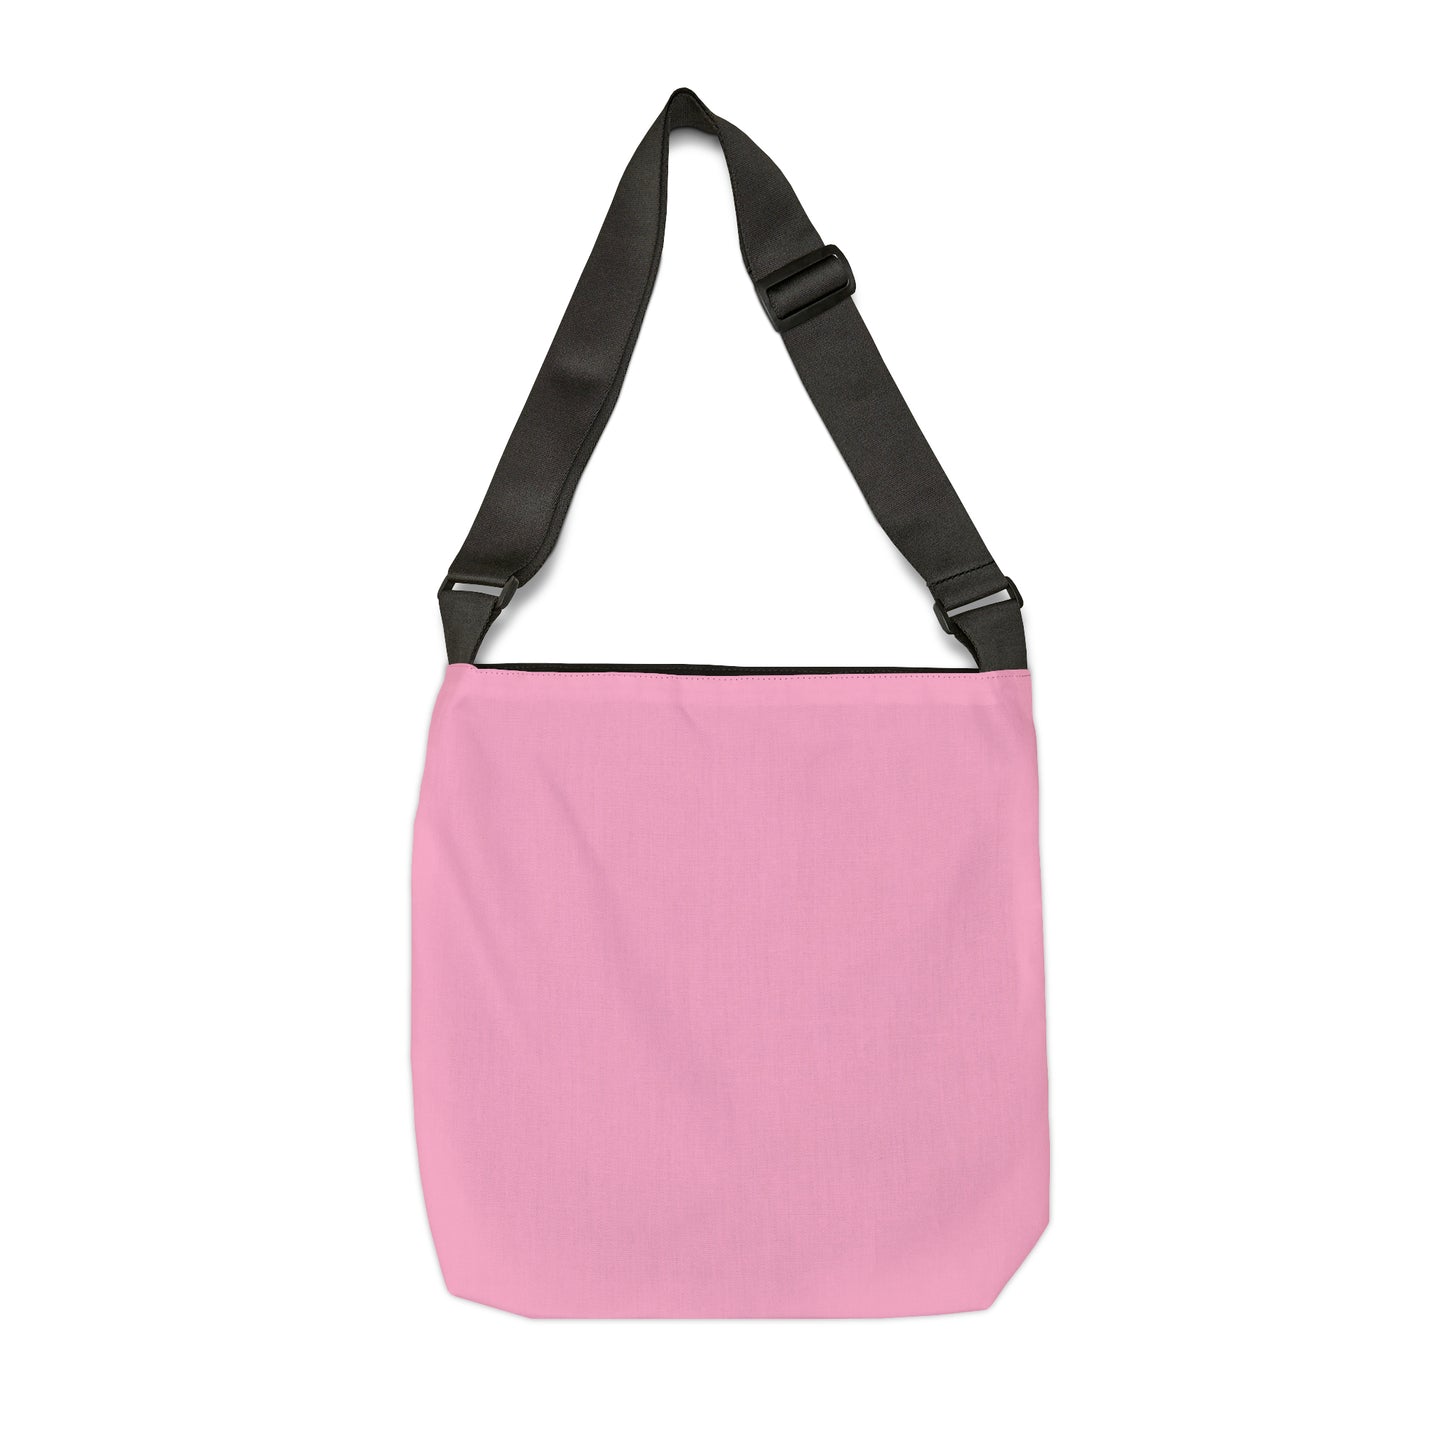 Celebrate The Day This Beautiful Powder Pink Adjustable Tote Bag! --FREE SHIPPING❤️